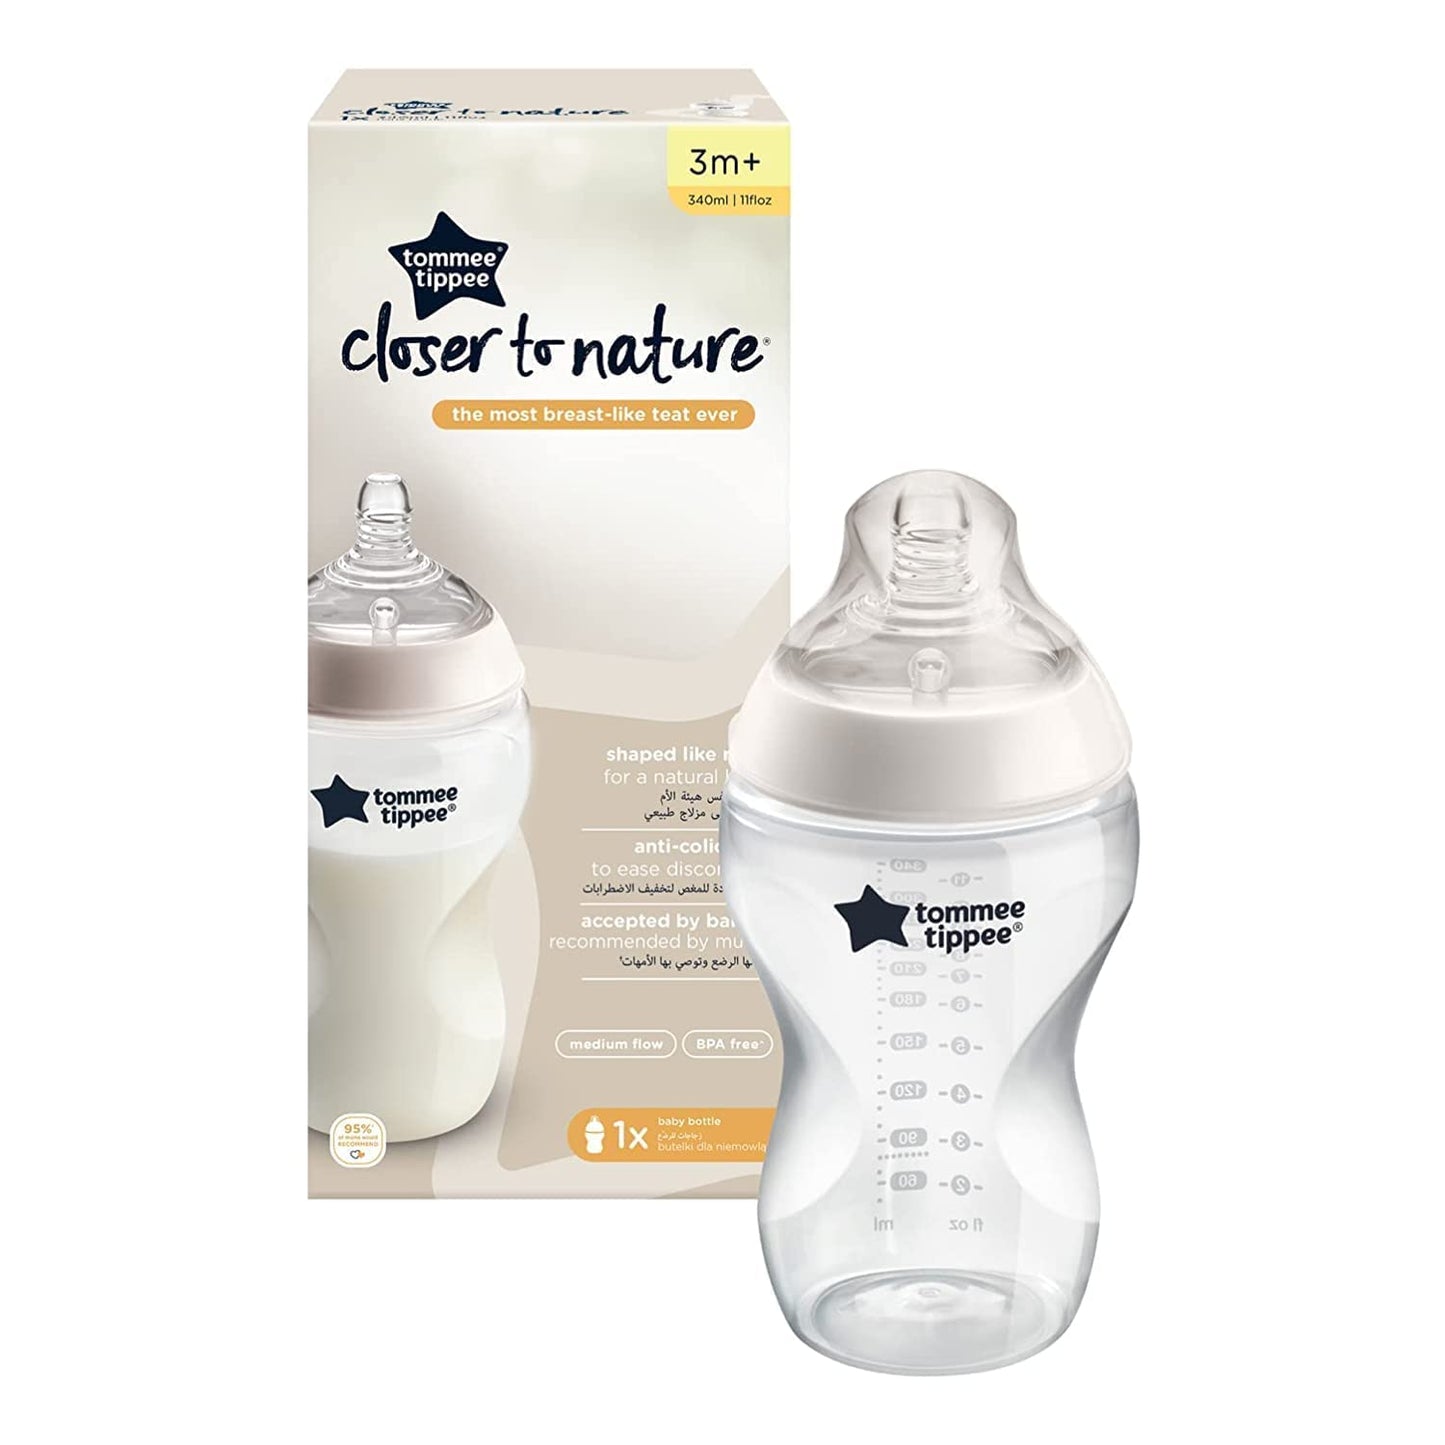 Tommee Tippee Closer To Nature Baby Bottle - 340ML